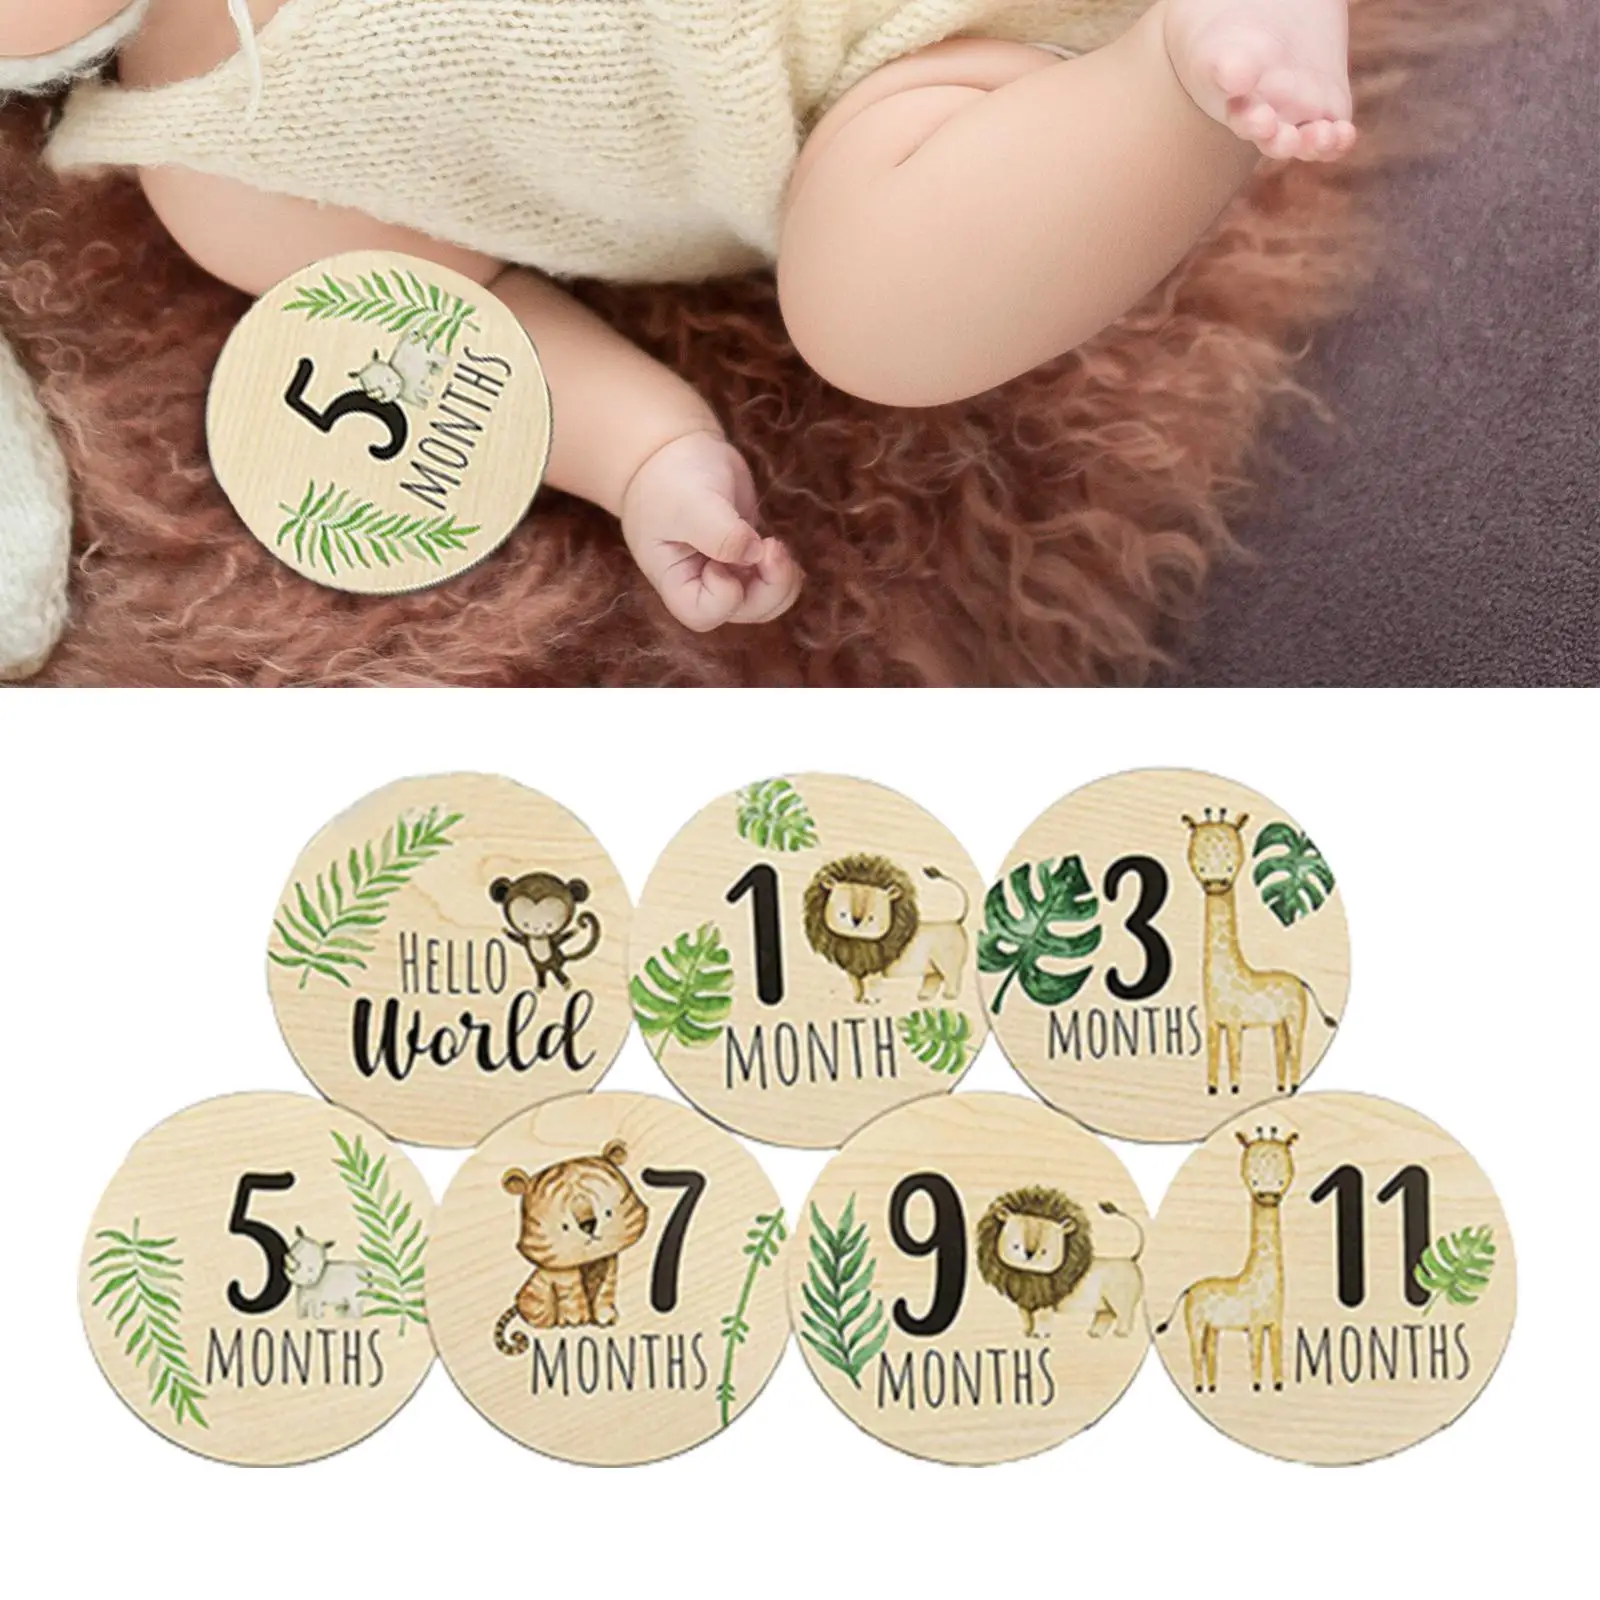 7 Pieces Baby Milestone Cards Baby Months Signs 1-12 Months Round Wooden Monthly Cards Discs for Baby Growth Newborn Photo Props